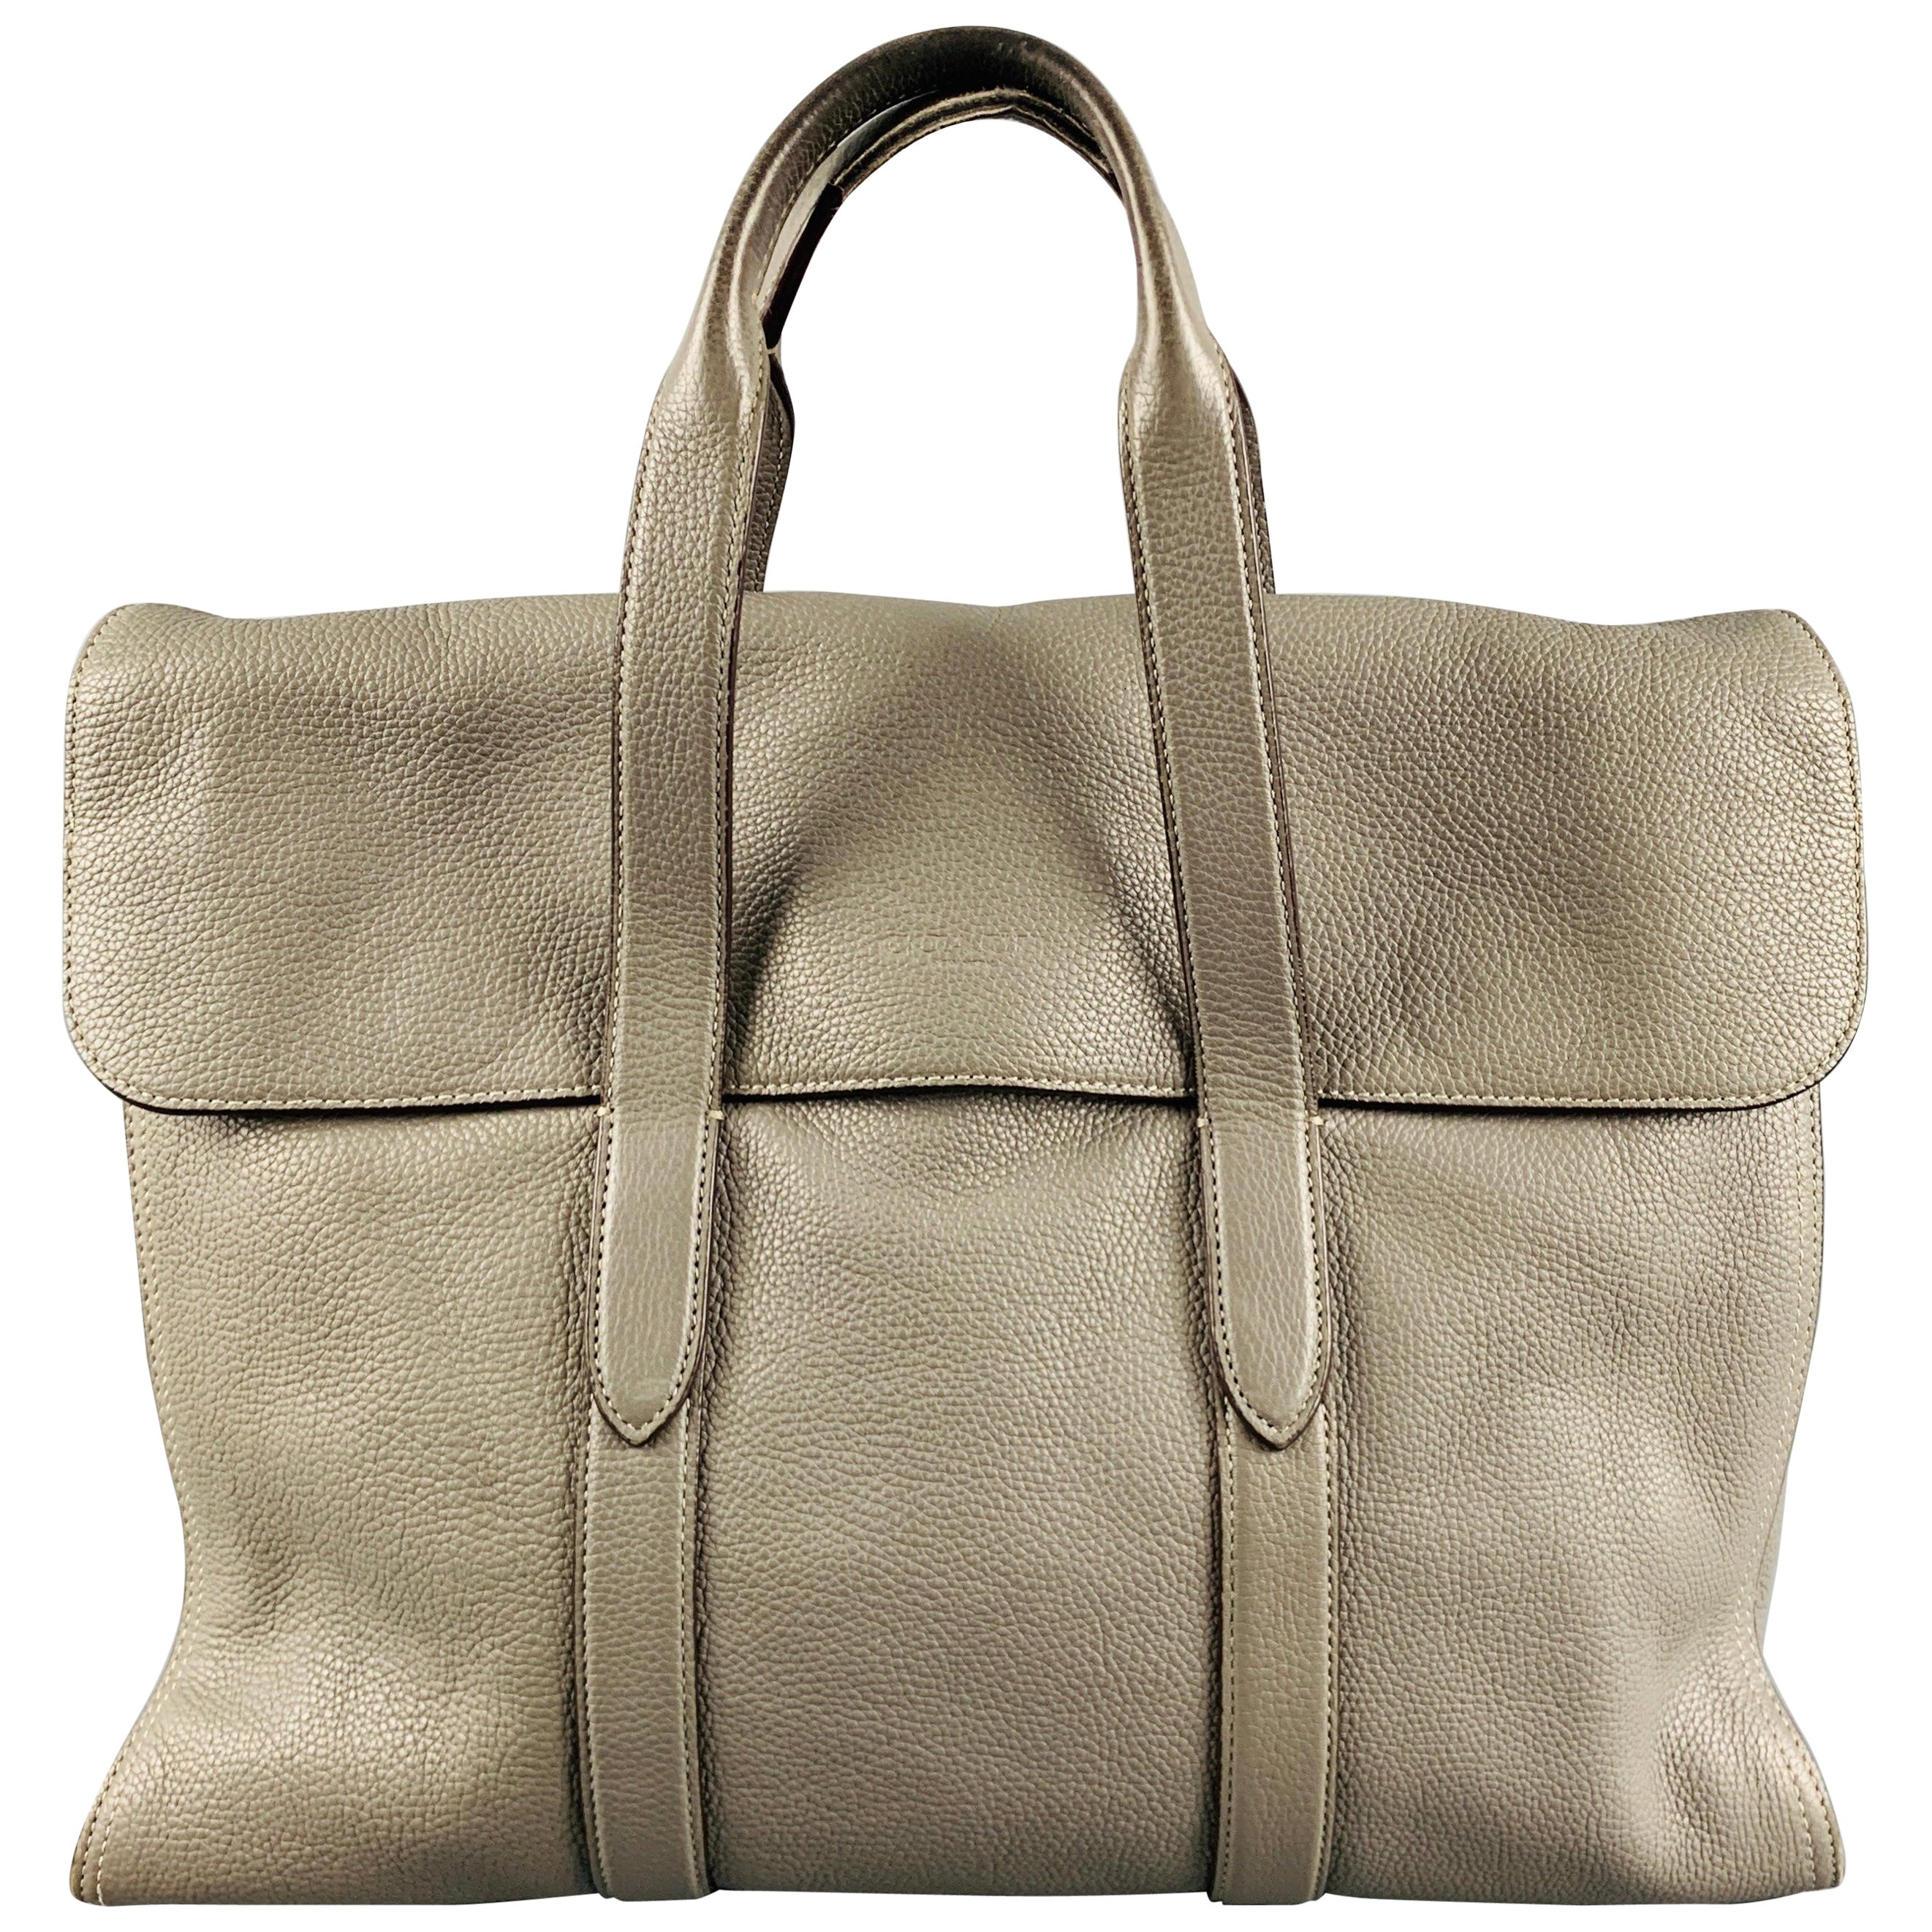 COACH Grey Pebble Grain Leather Tote Bag For Sale